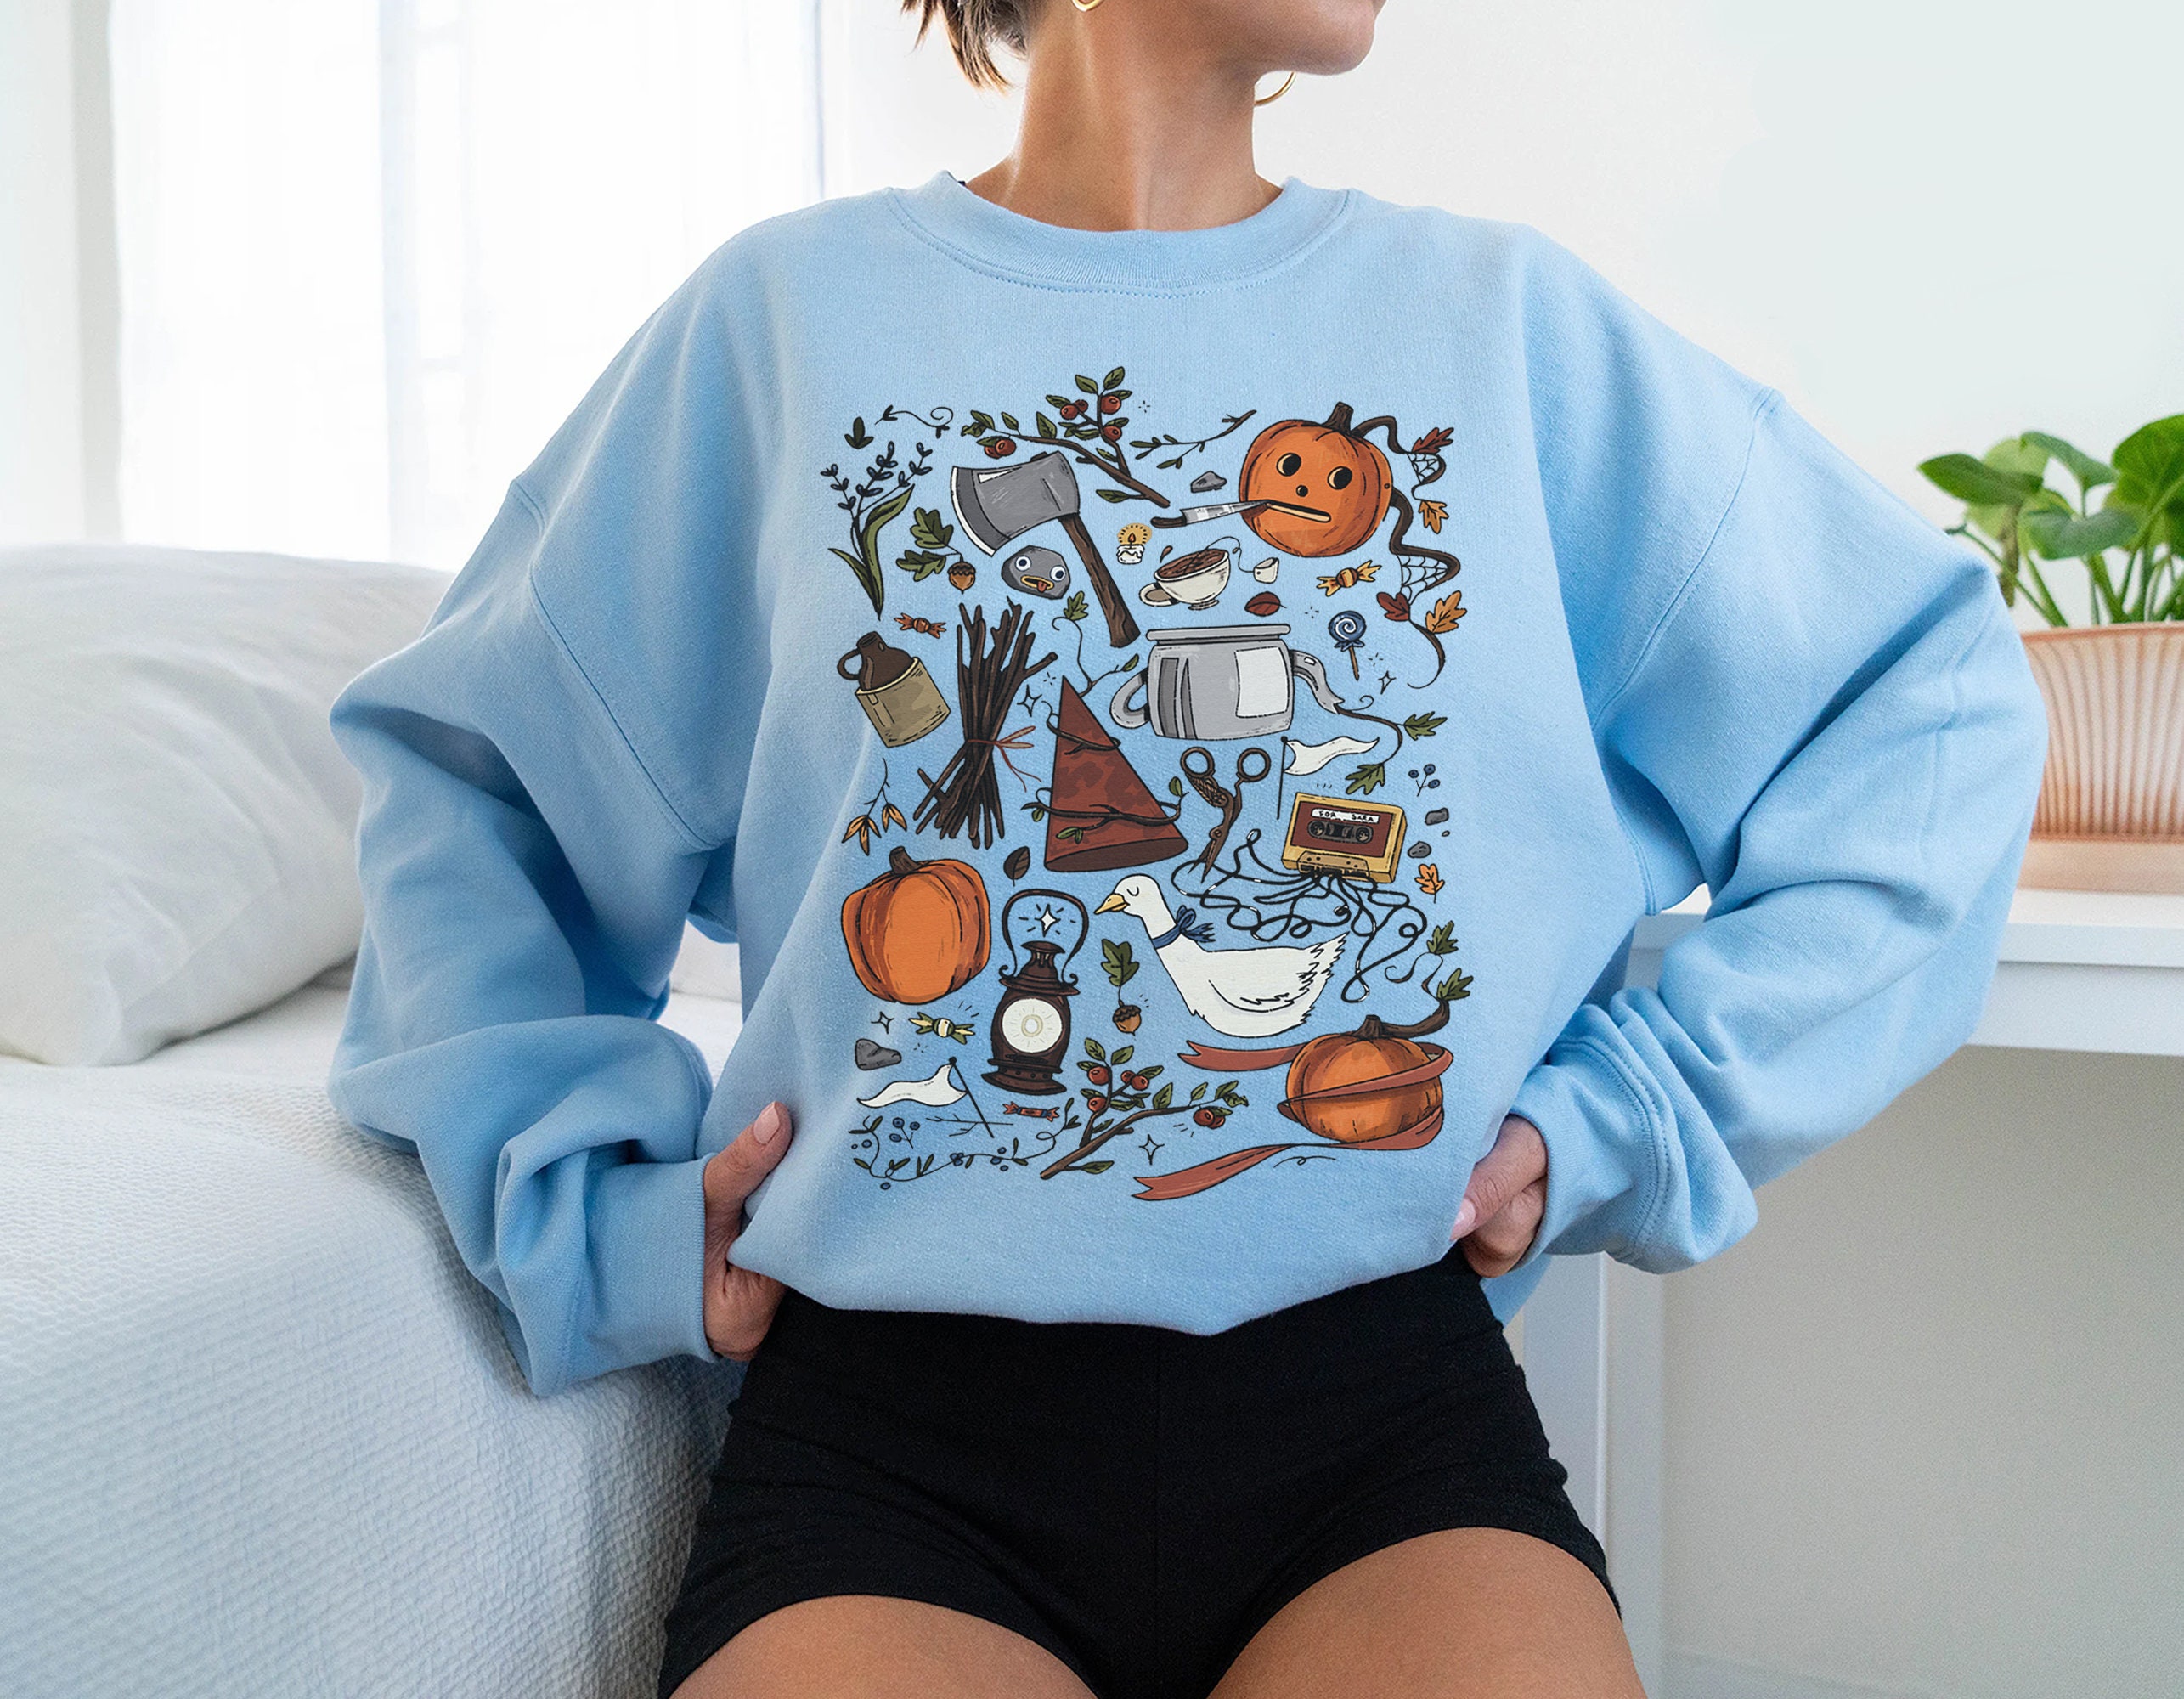 Over The Garden Wall Sweatshirt sold by George Paul